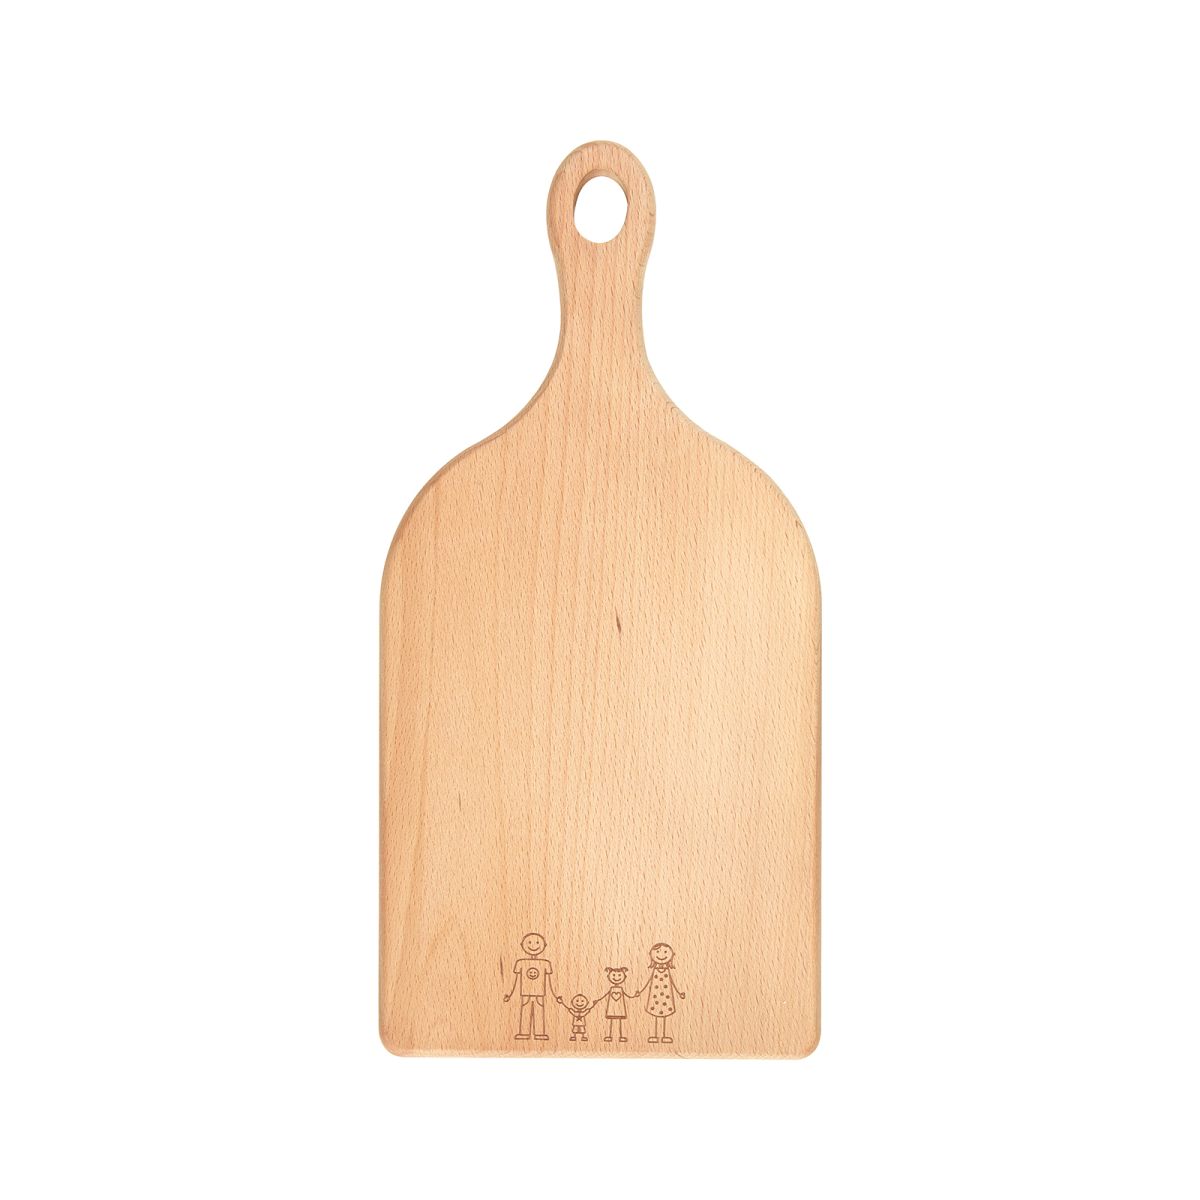 FRIENDS & FAMILY SMALL HANDLED BOARD